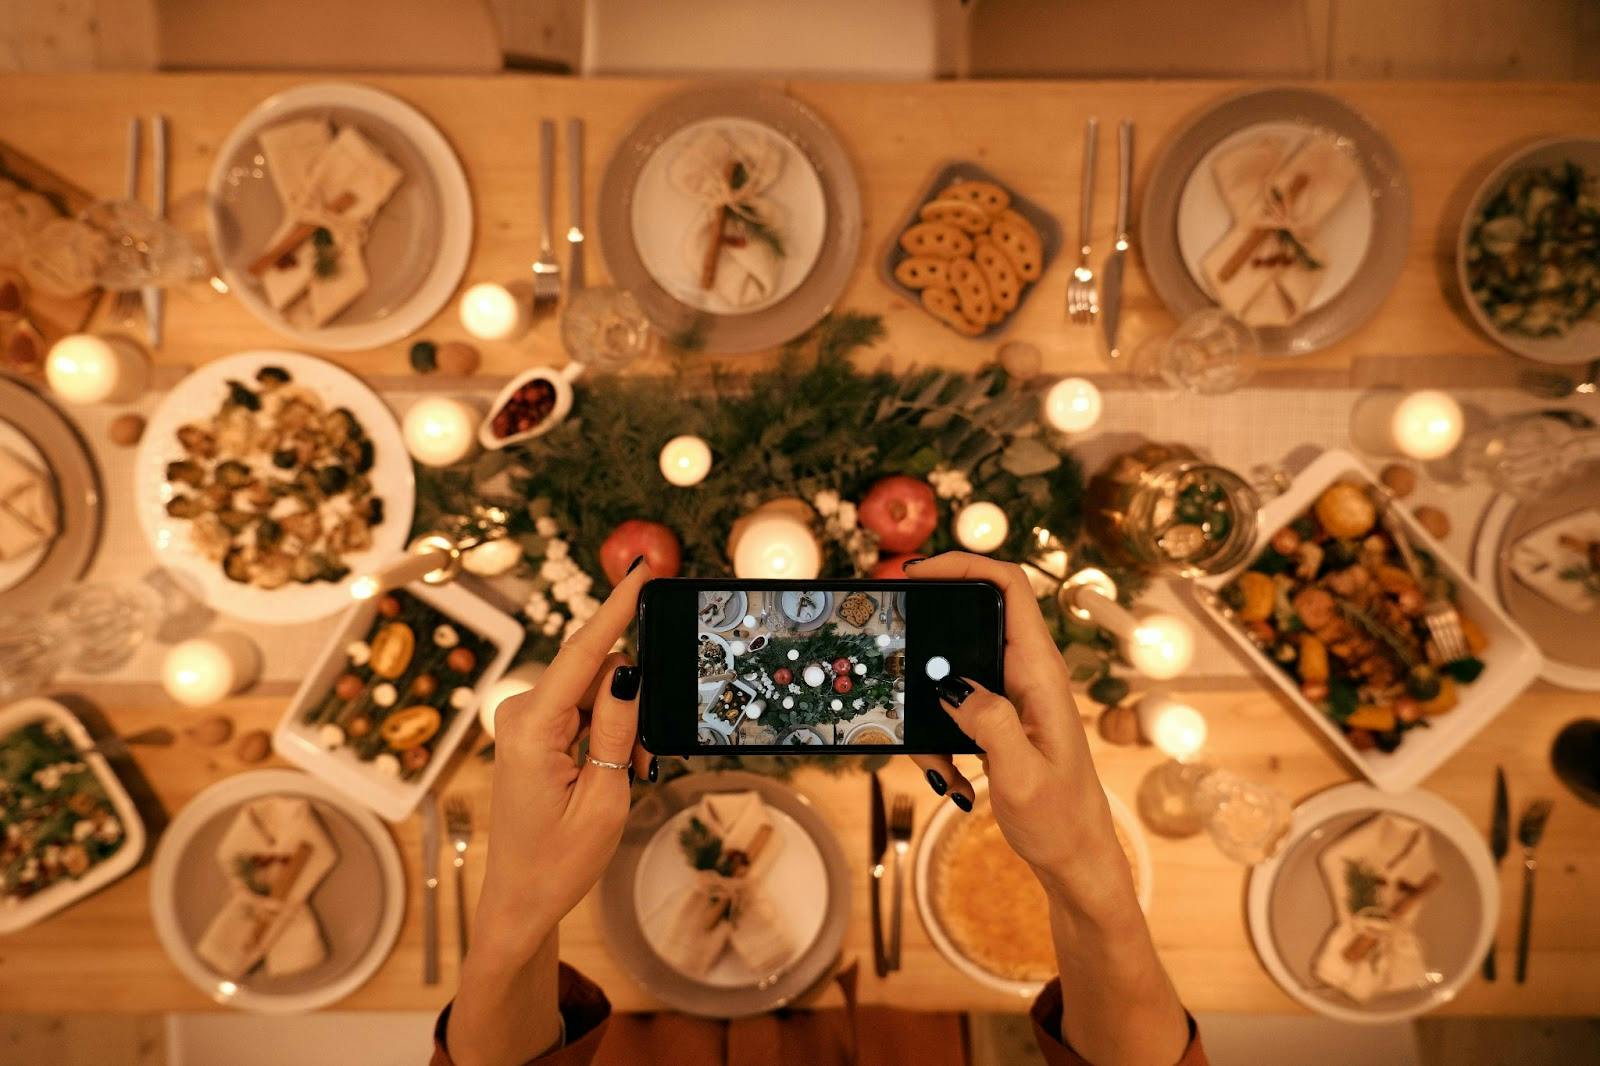 Using a mobile phone camera to capture a photo of a holiday dinner spread